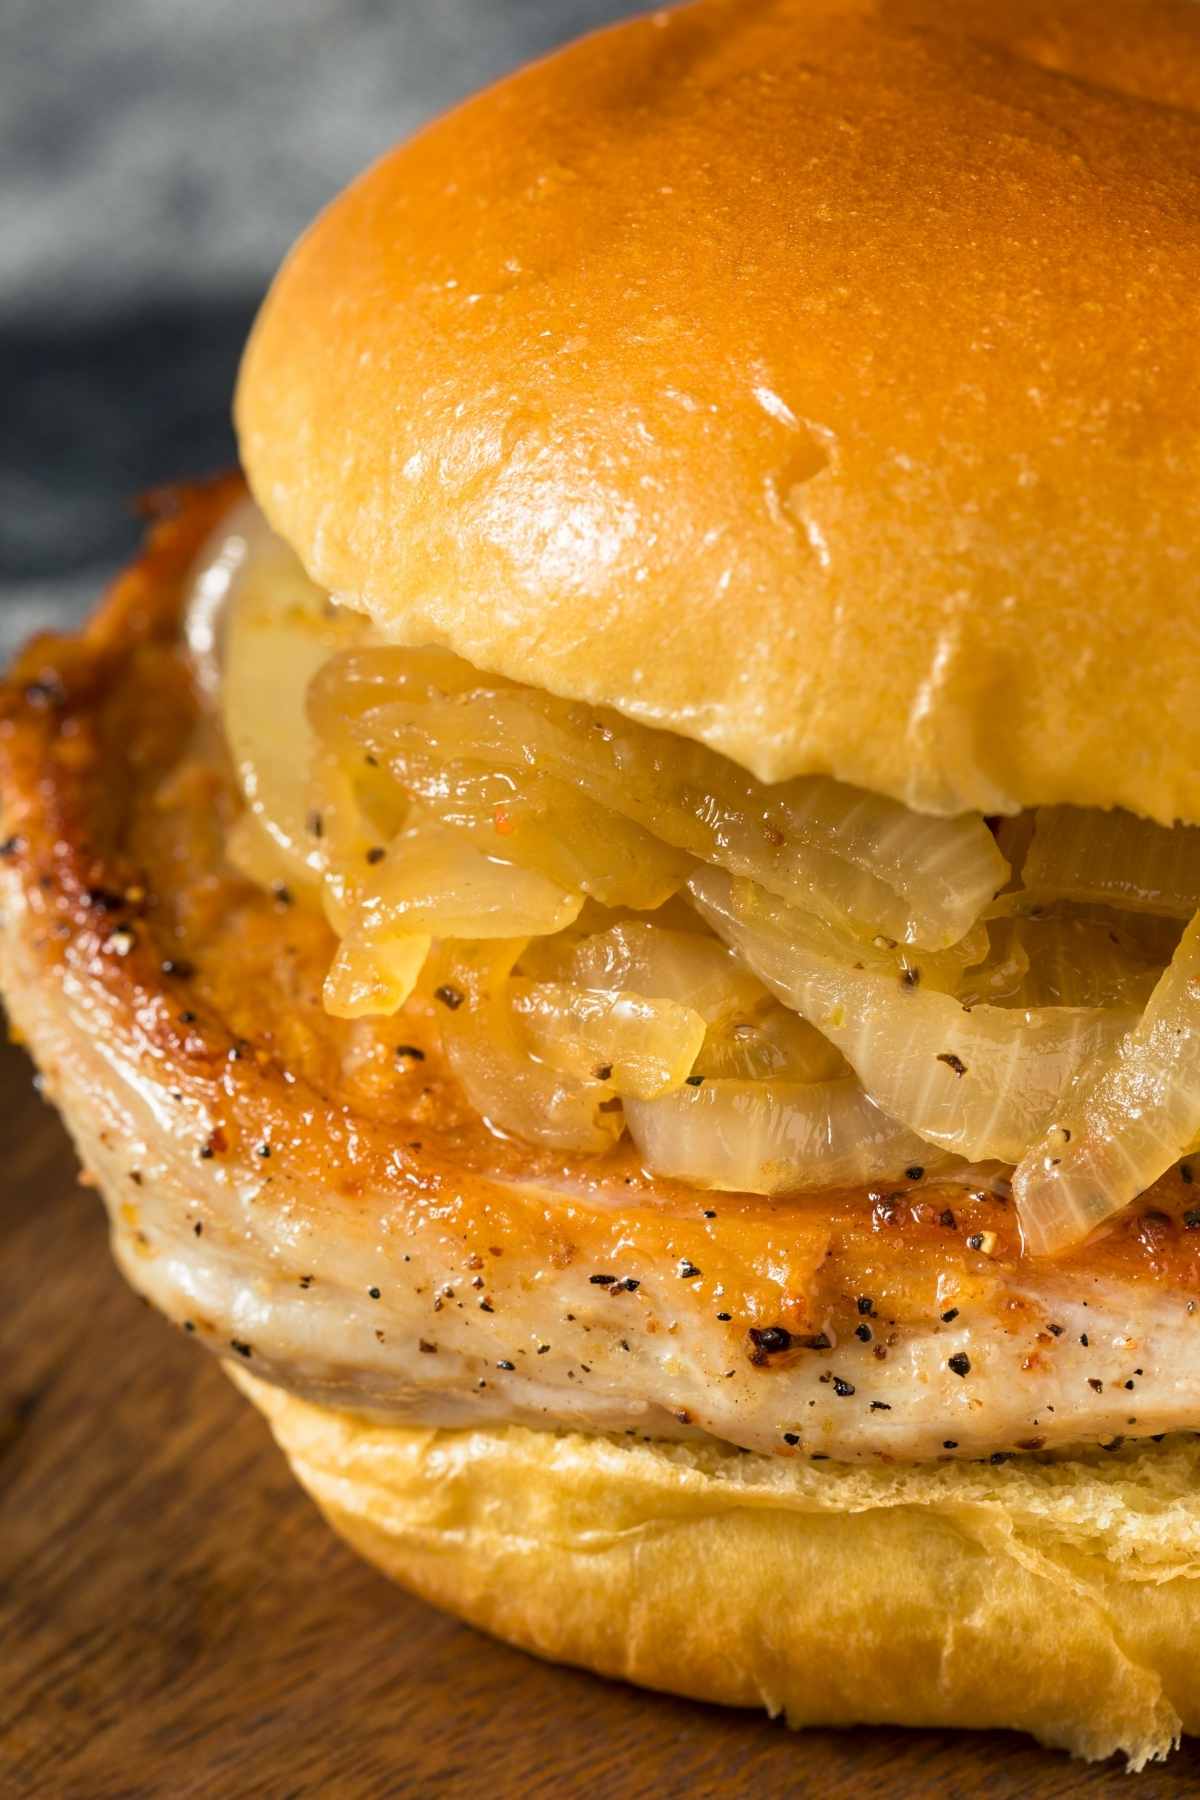 This Chicago-style Pork Chop Sandwich might be quick and easy to make, but do not let that fool you. It is tasty, crunchy, and packs plenty of flavor, so save this recipe immediately to enjoy one night this week!